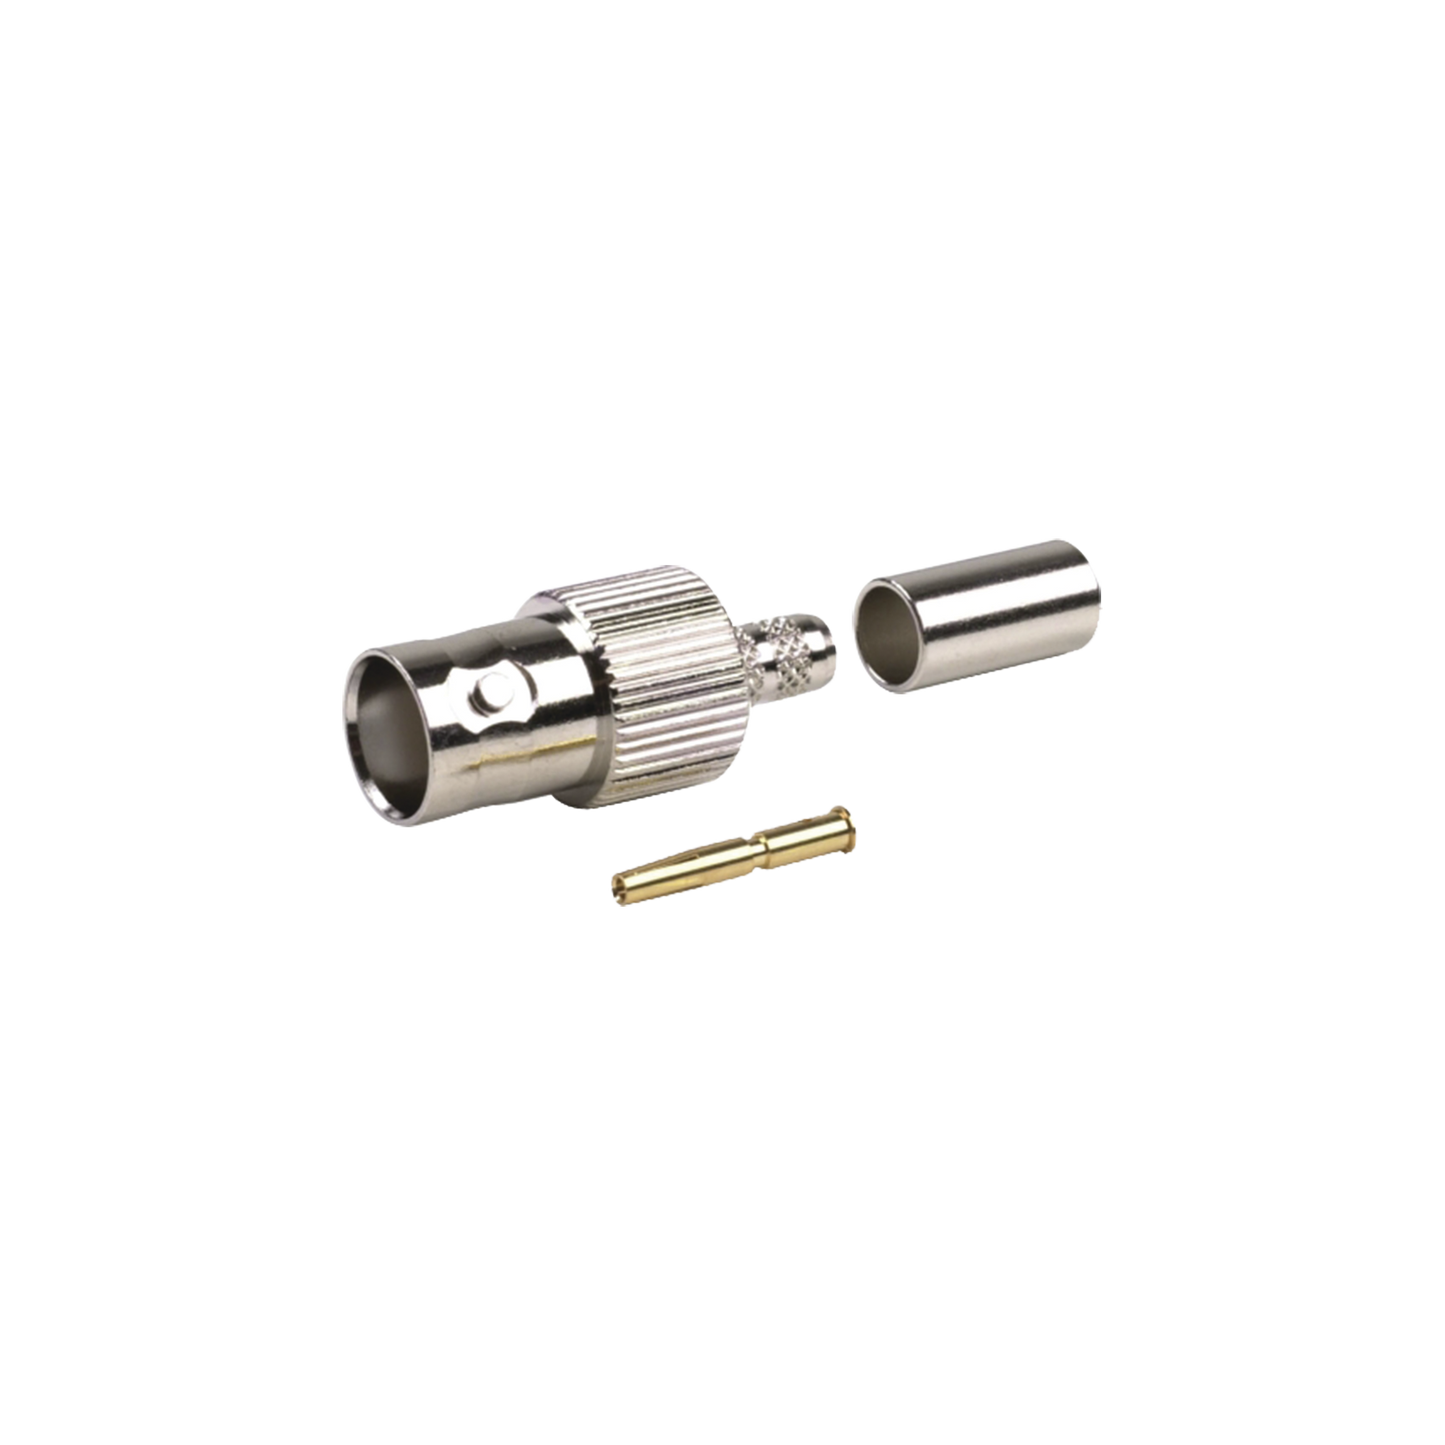 BNC Female Connector to Crimp on RG-8/X, LMR-240, BELDEN 9258 Cables, Nickel/ Gold/ Delrin.